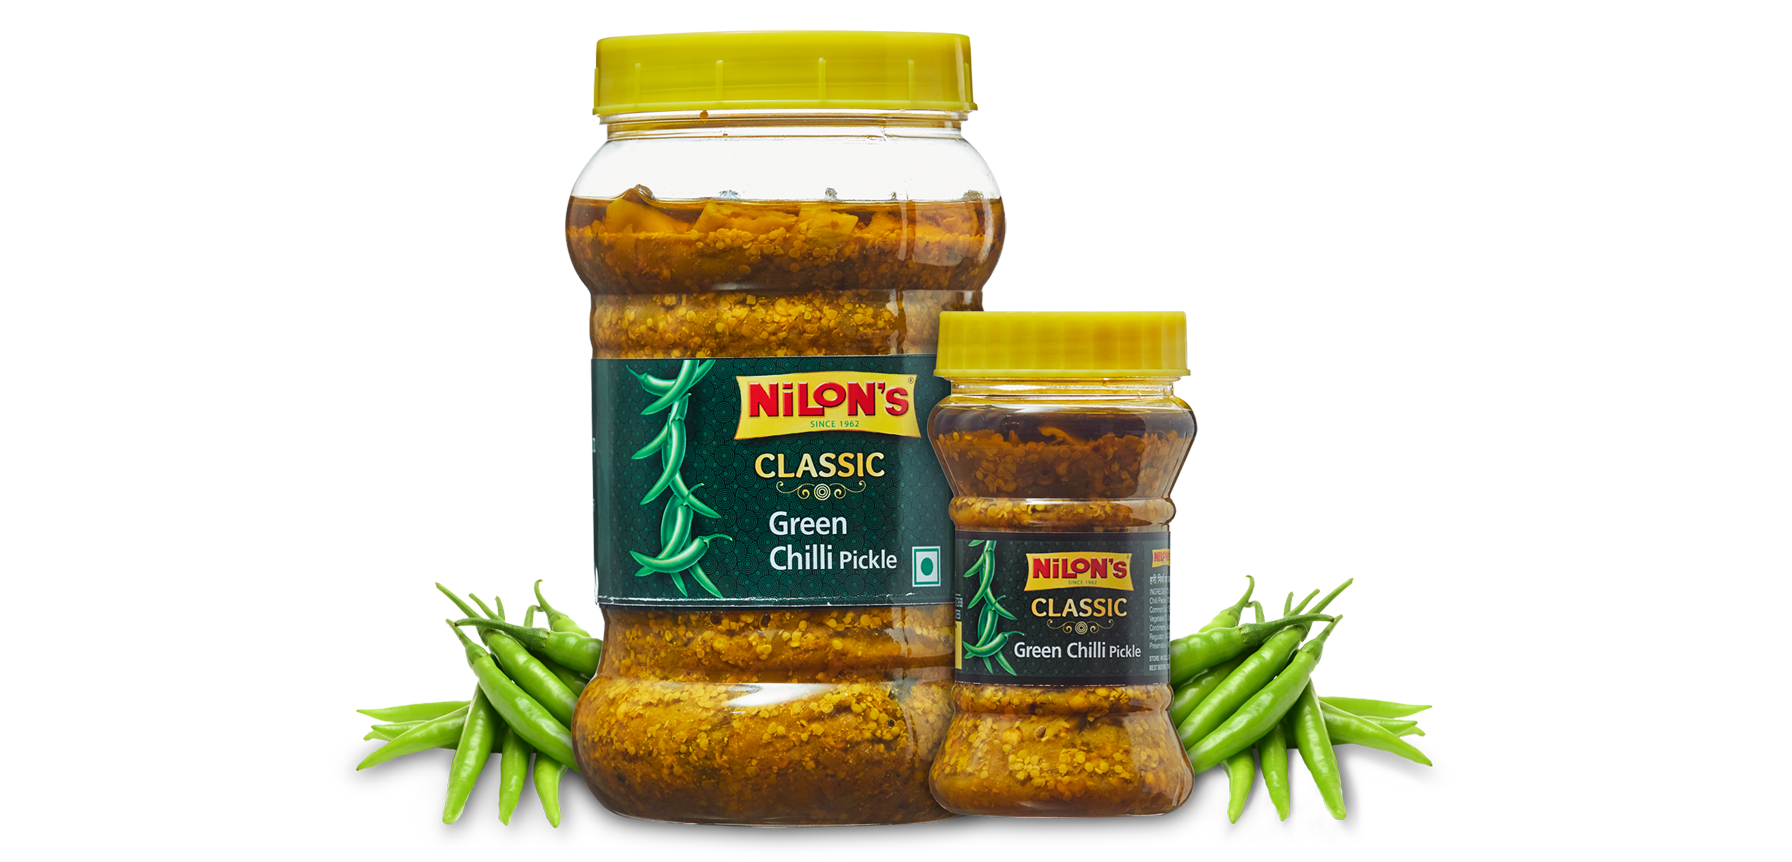 Green Chilli Pickle (Nilons) 200g.??